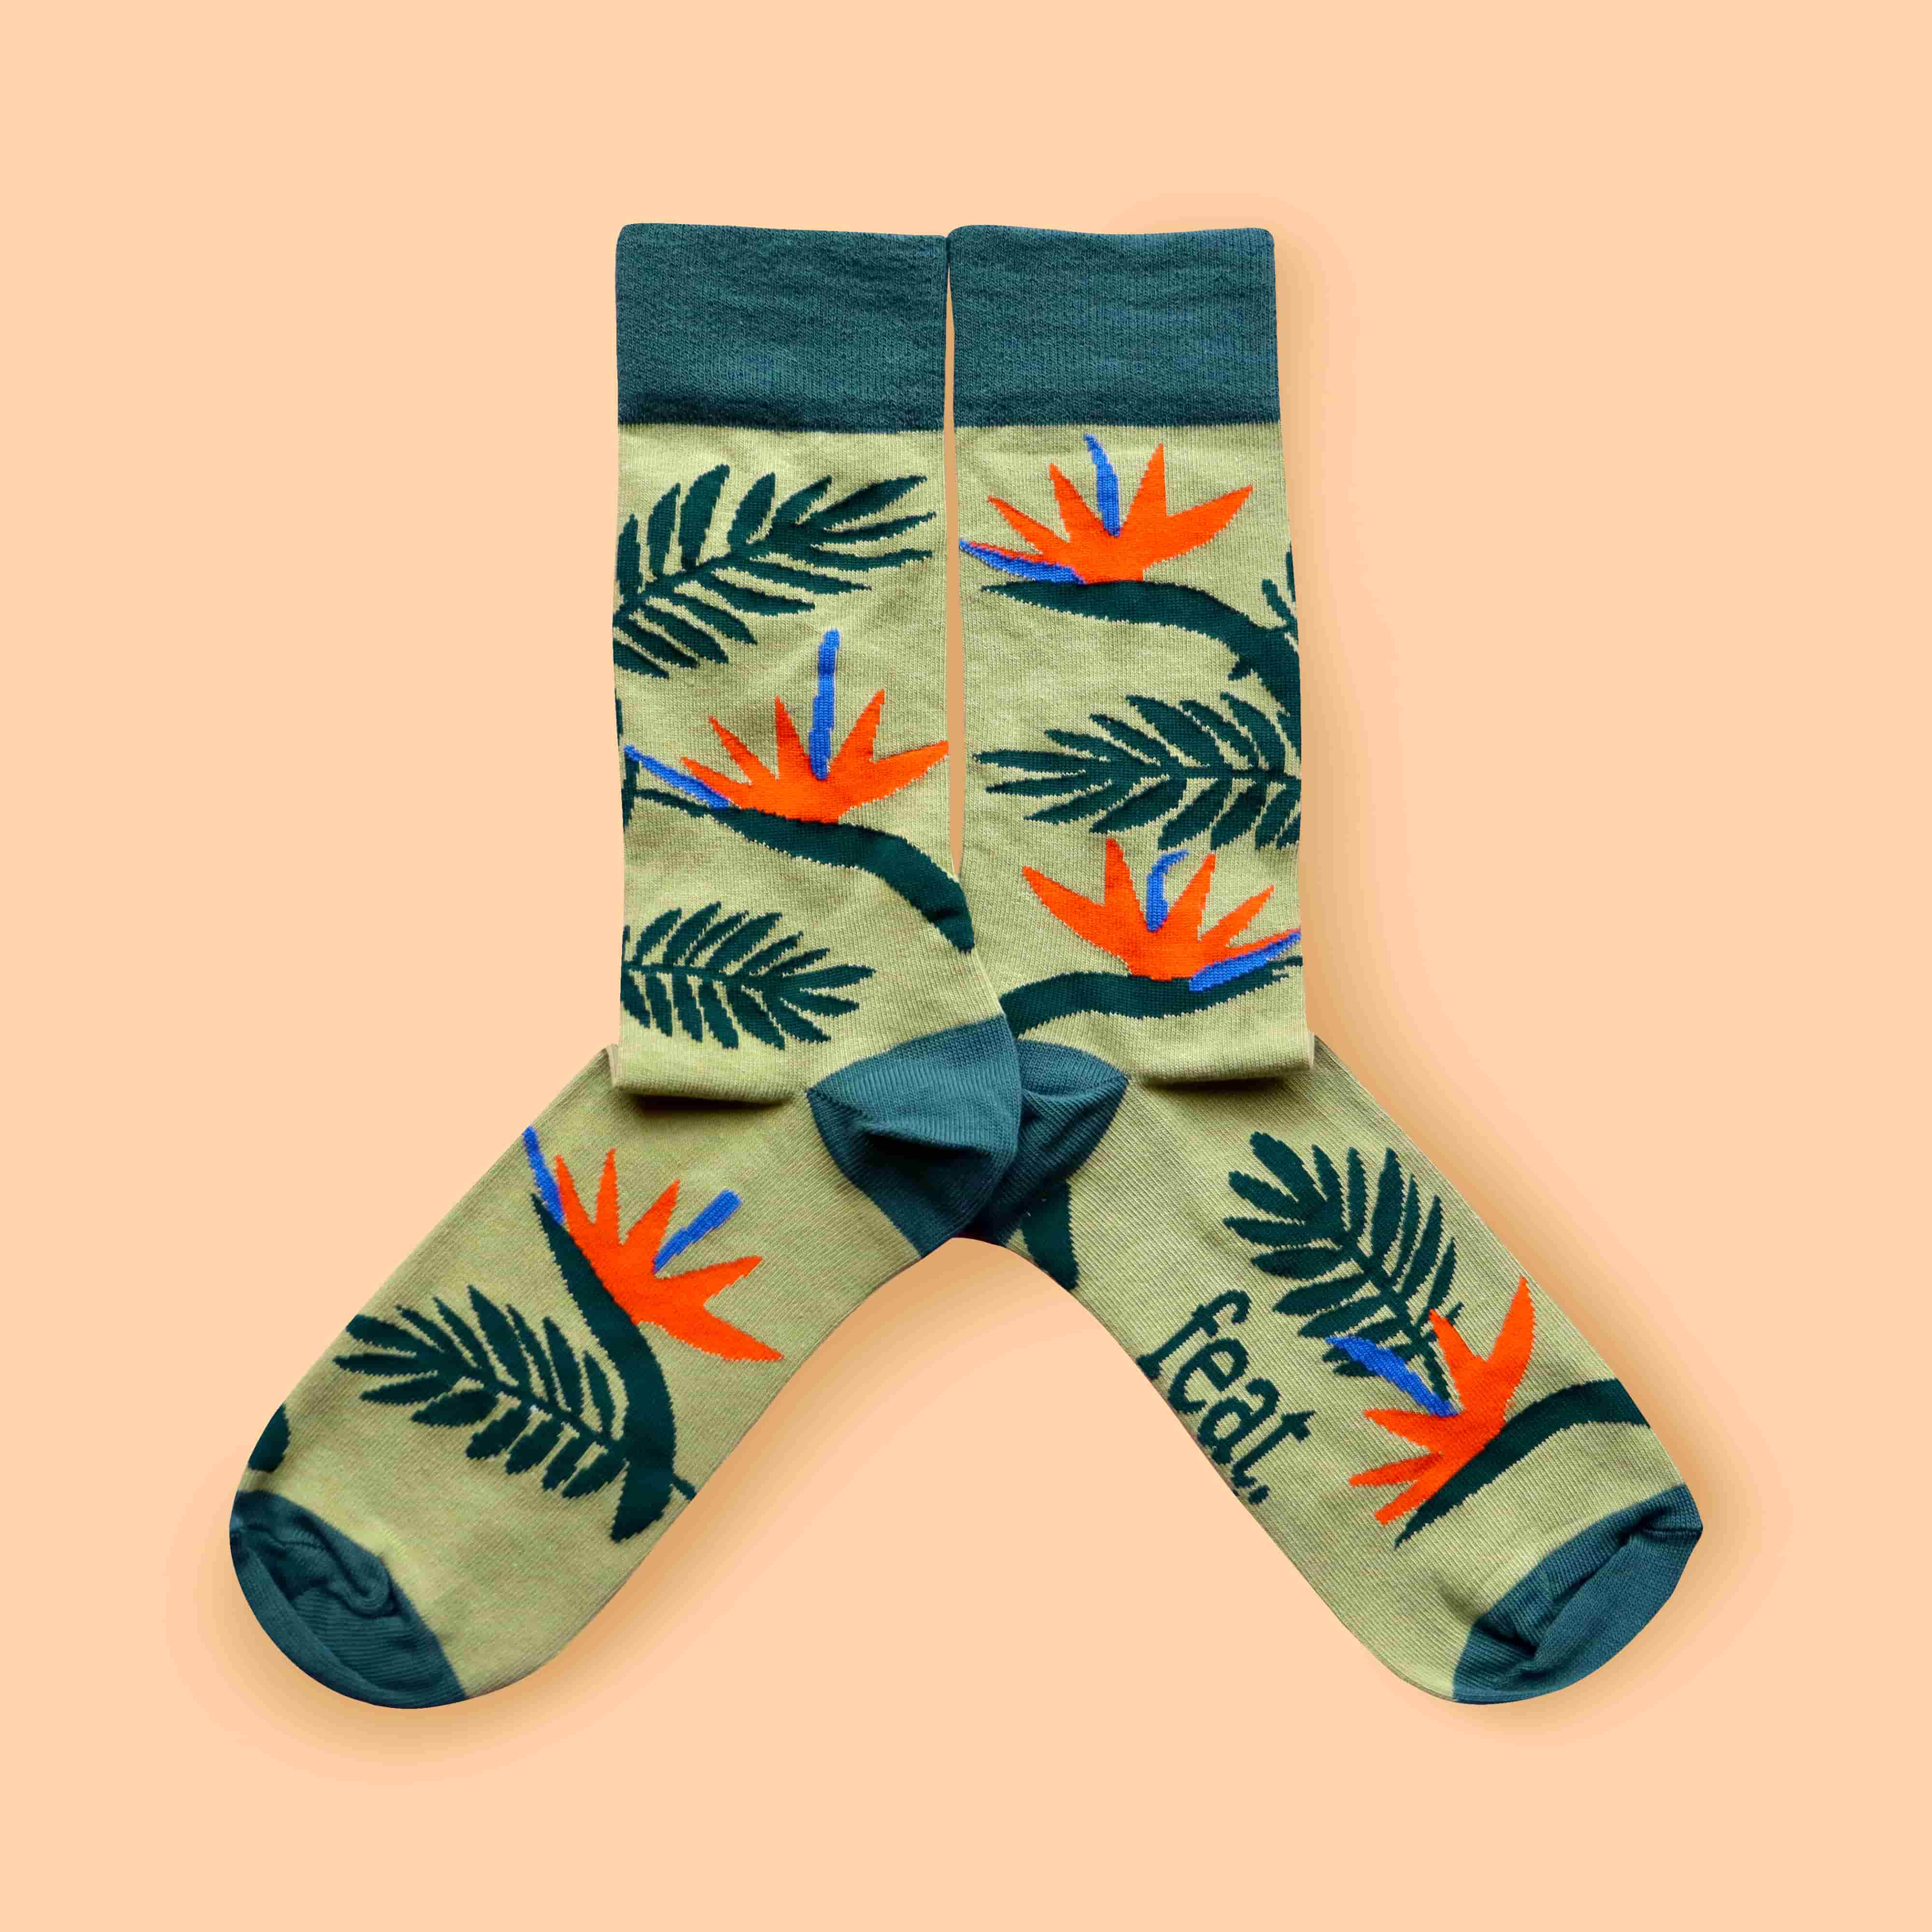 Strelitzia bird of paradise flower socks and accessories made in South Africa